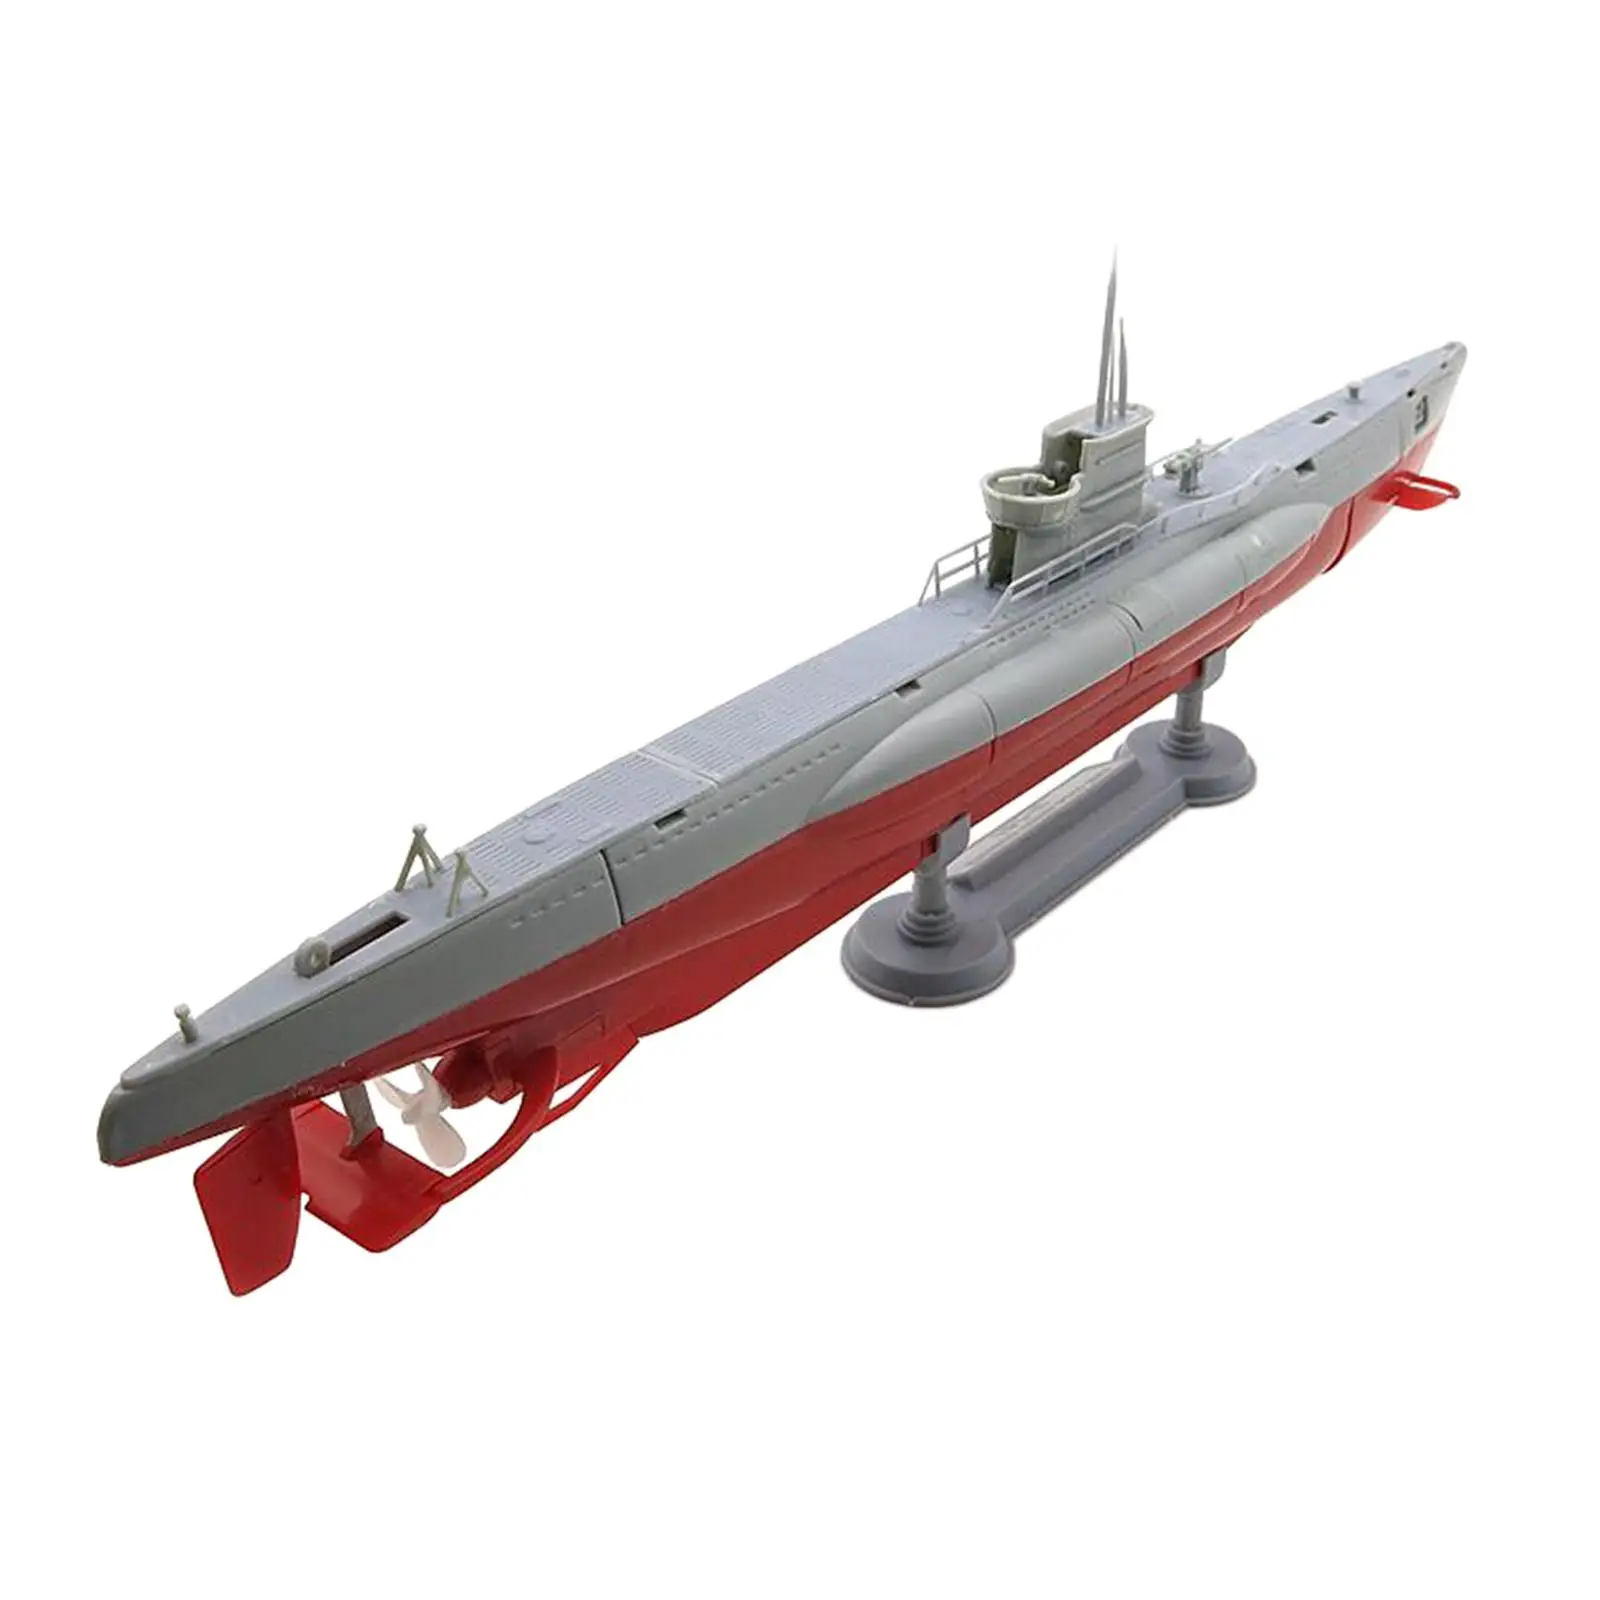 1:150 Display Ship Puzzle Simulation Desktop Decor Jigsaw Toys 4D Assembled Ship Model Warship Assembly Model for Kids Gifts